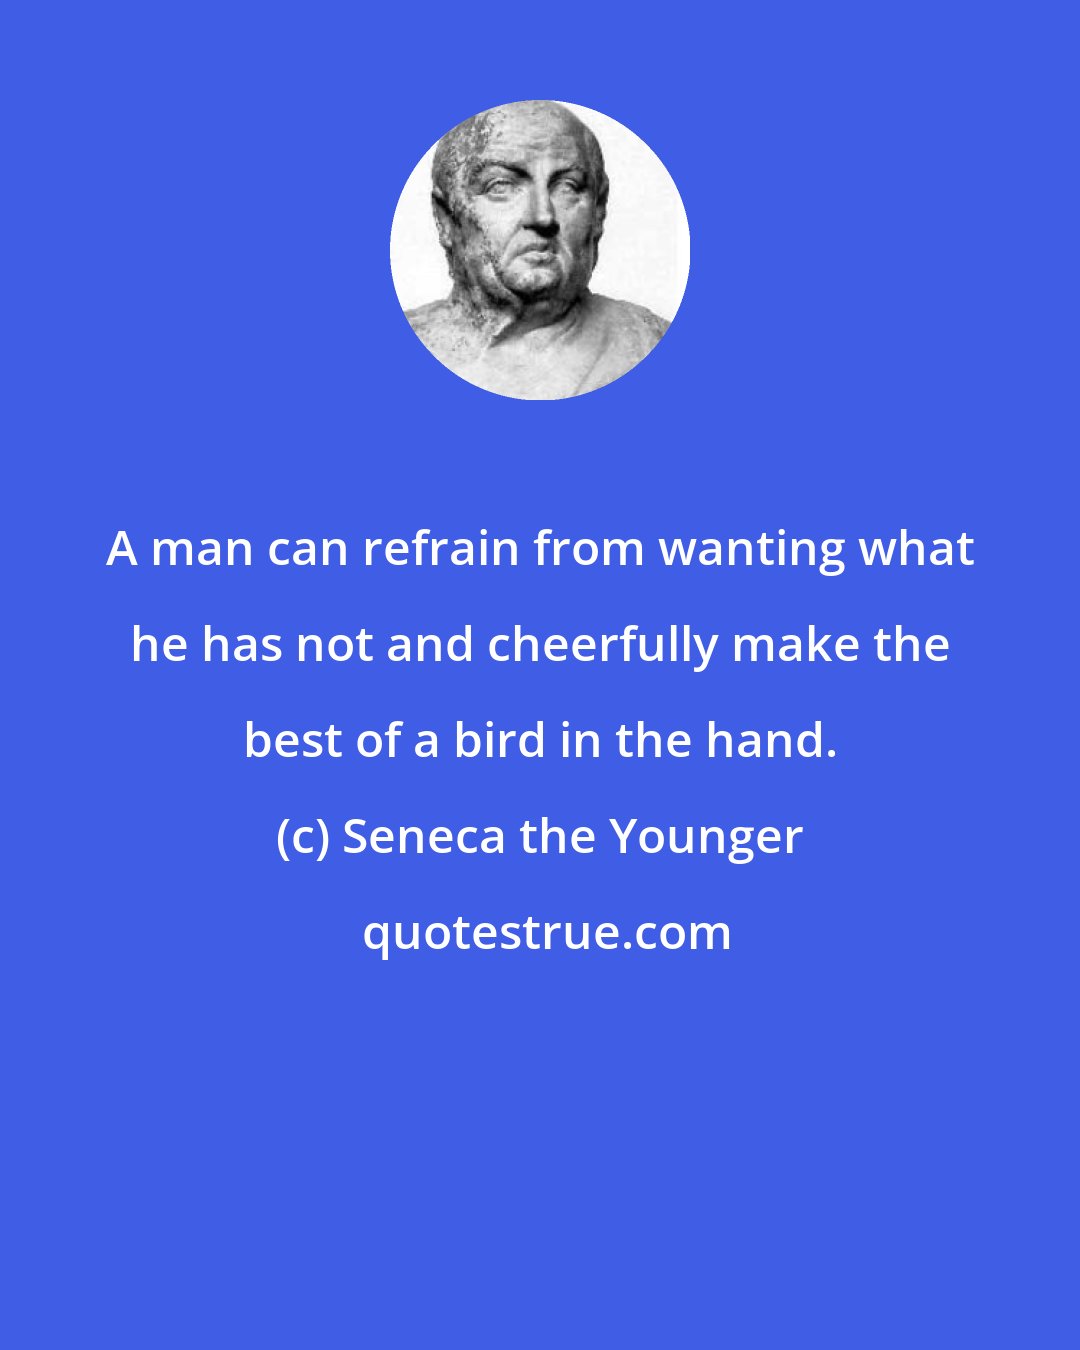 Seneca the Younger: A man can refrain from wanting what he has not and cheerfully make the best of a bird in the hand.